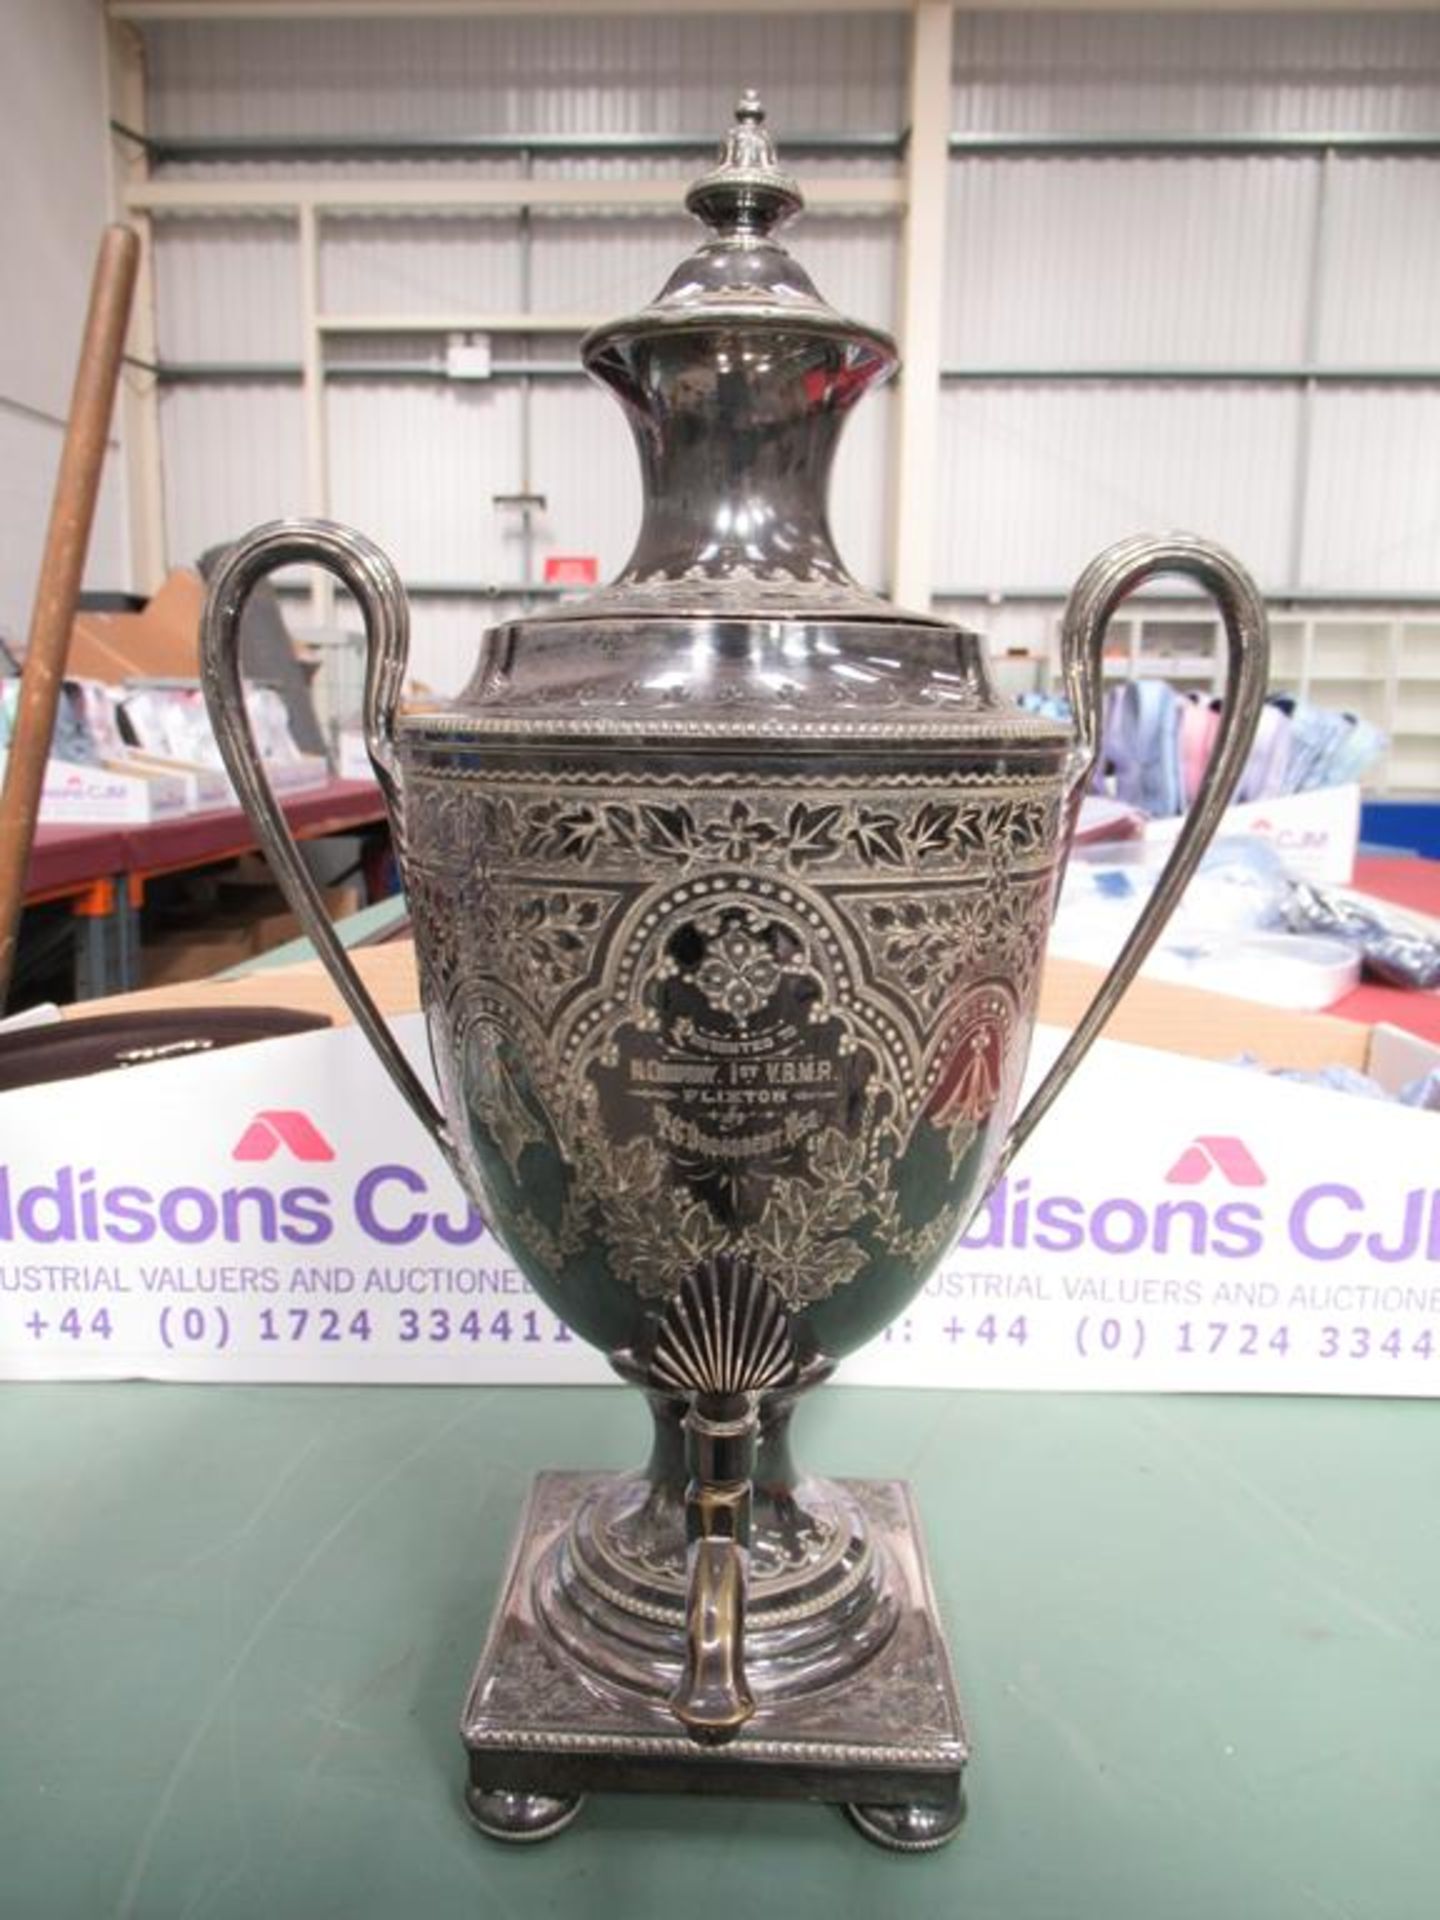 A Silver Plated Tea Urn presented in Flixton, 1895. This urn is at least a proven 125 years old